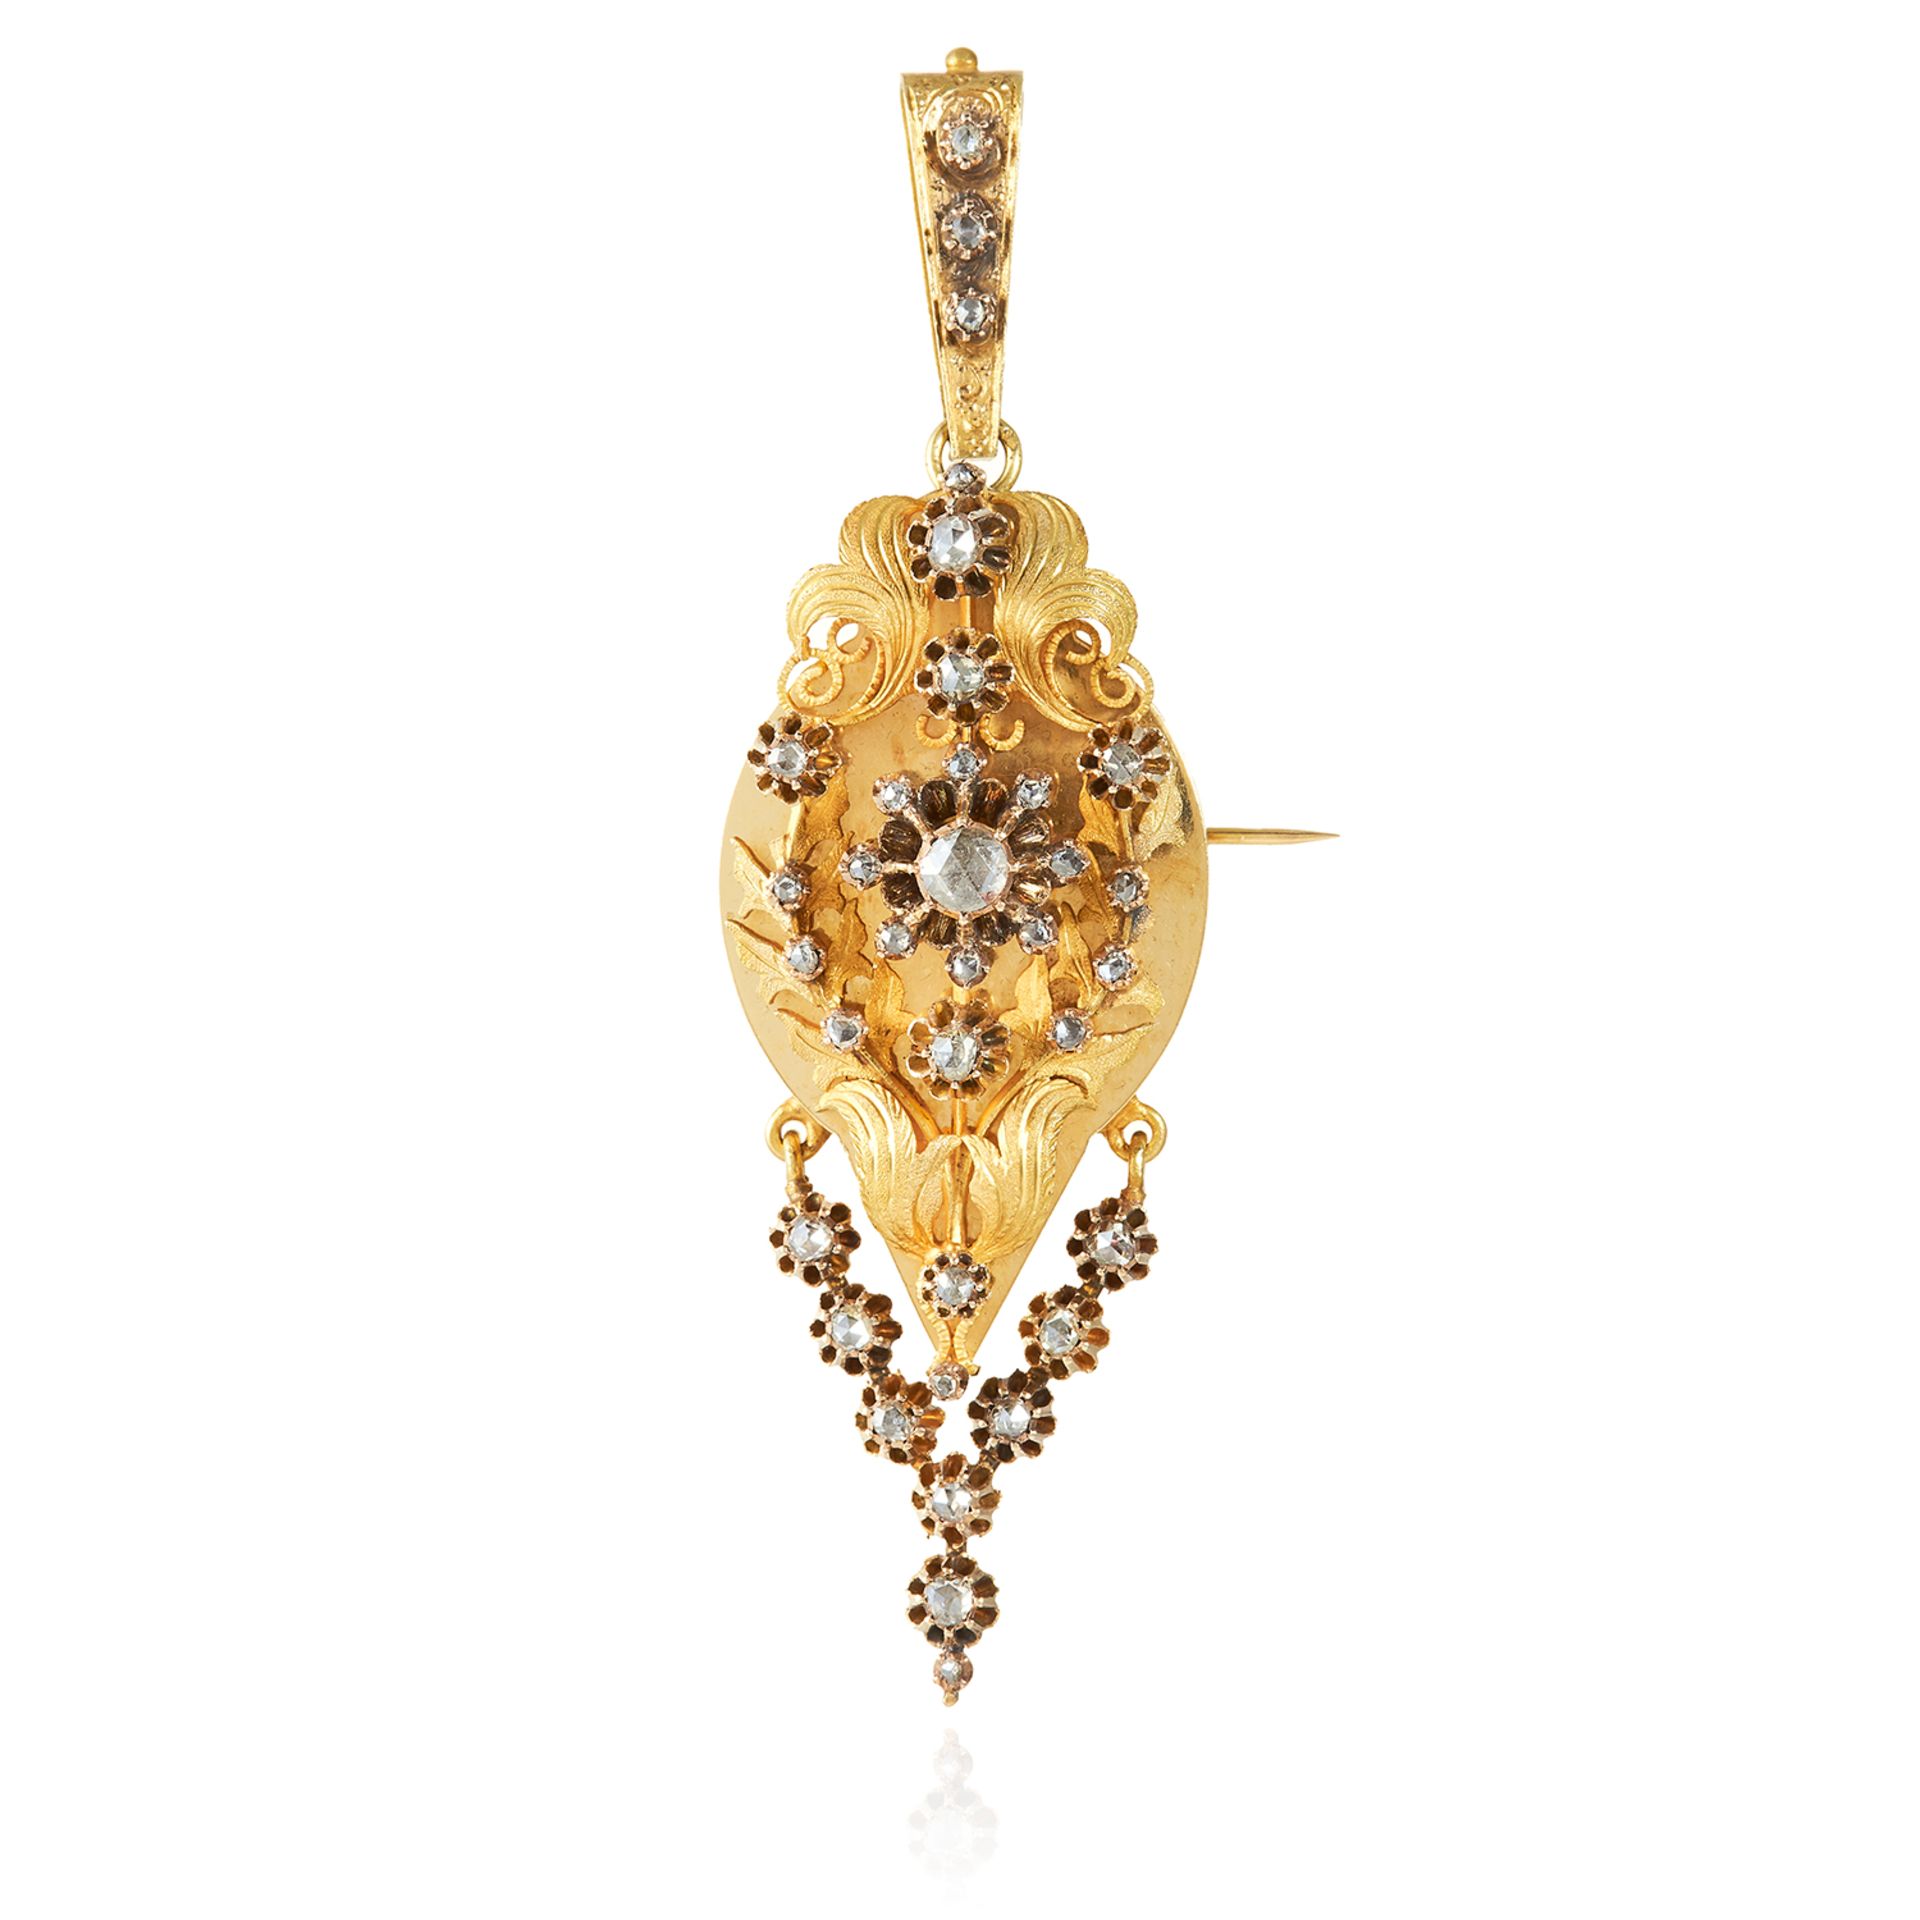 AN ANTIQUE DIAMOND MOURNING PENDANT, 19TH CENTURY in high carat yellow gold, jewelled with rose